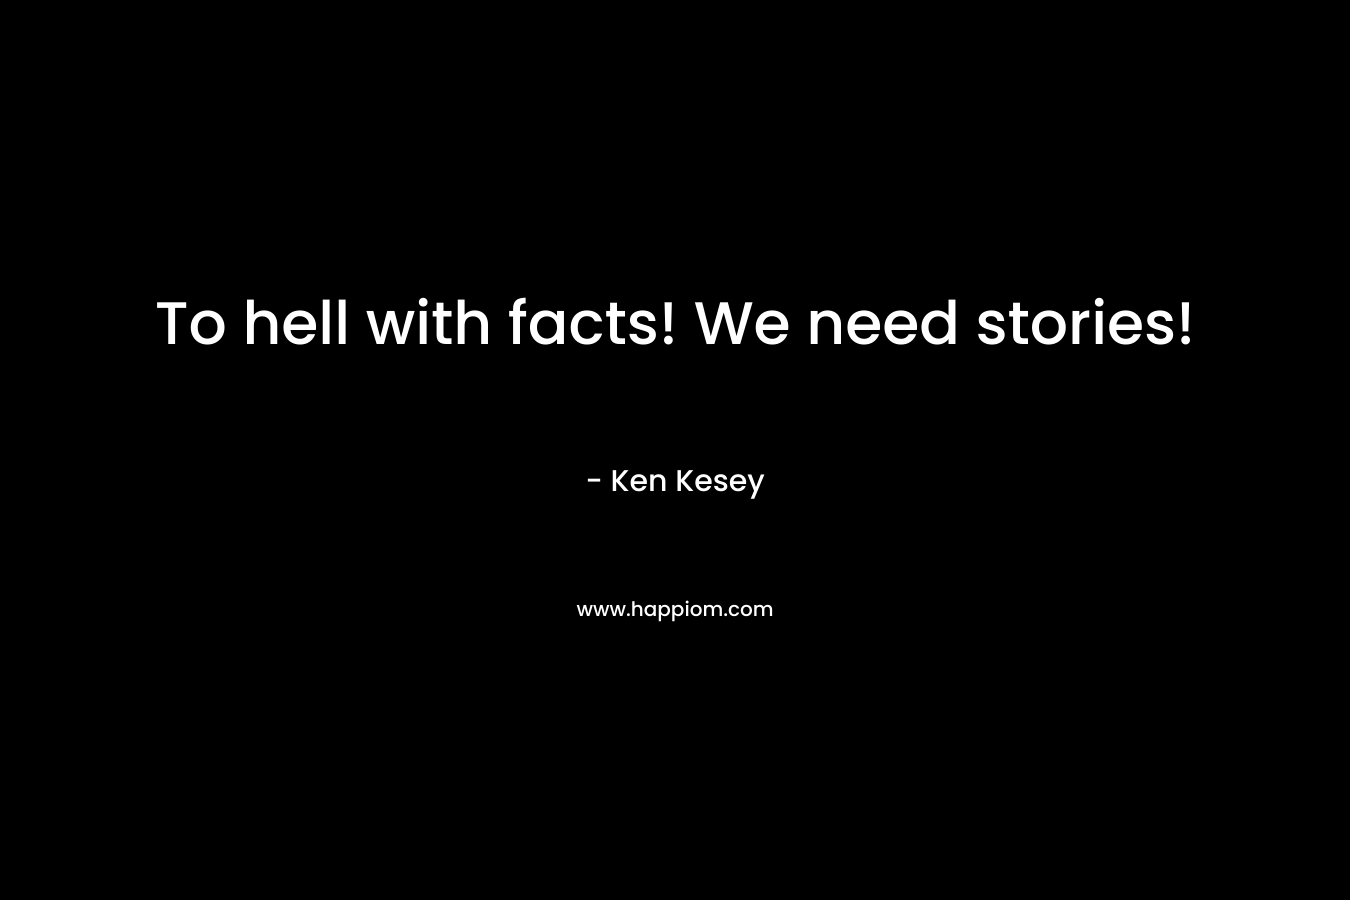 To hell with facts! We need stories! – Ken Kesey